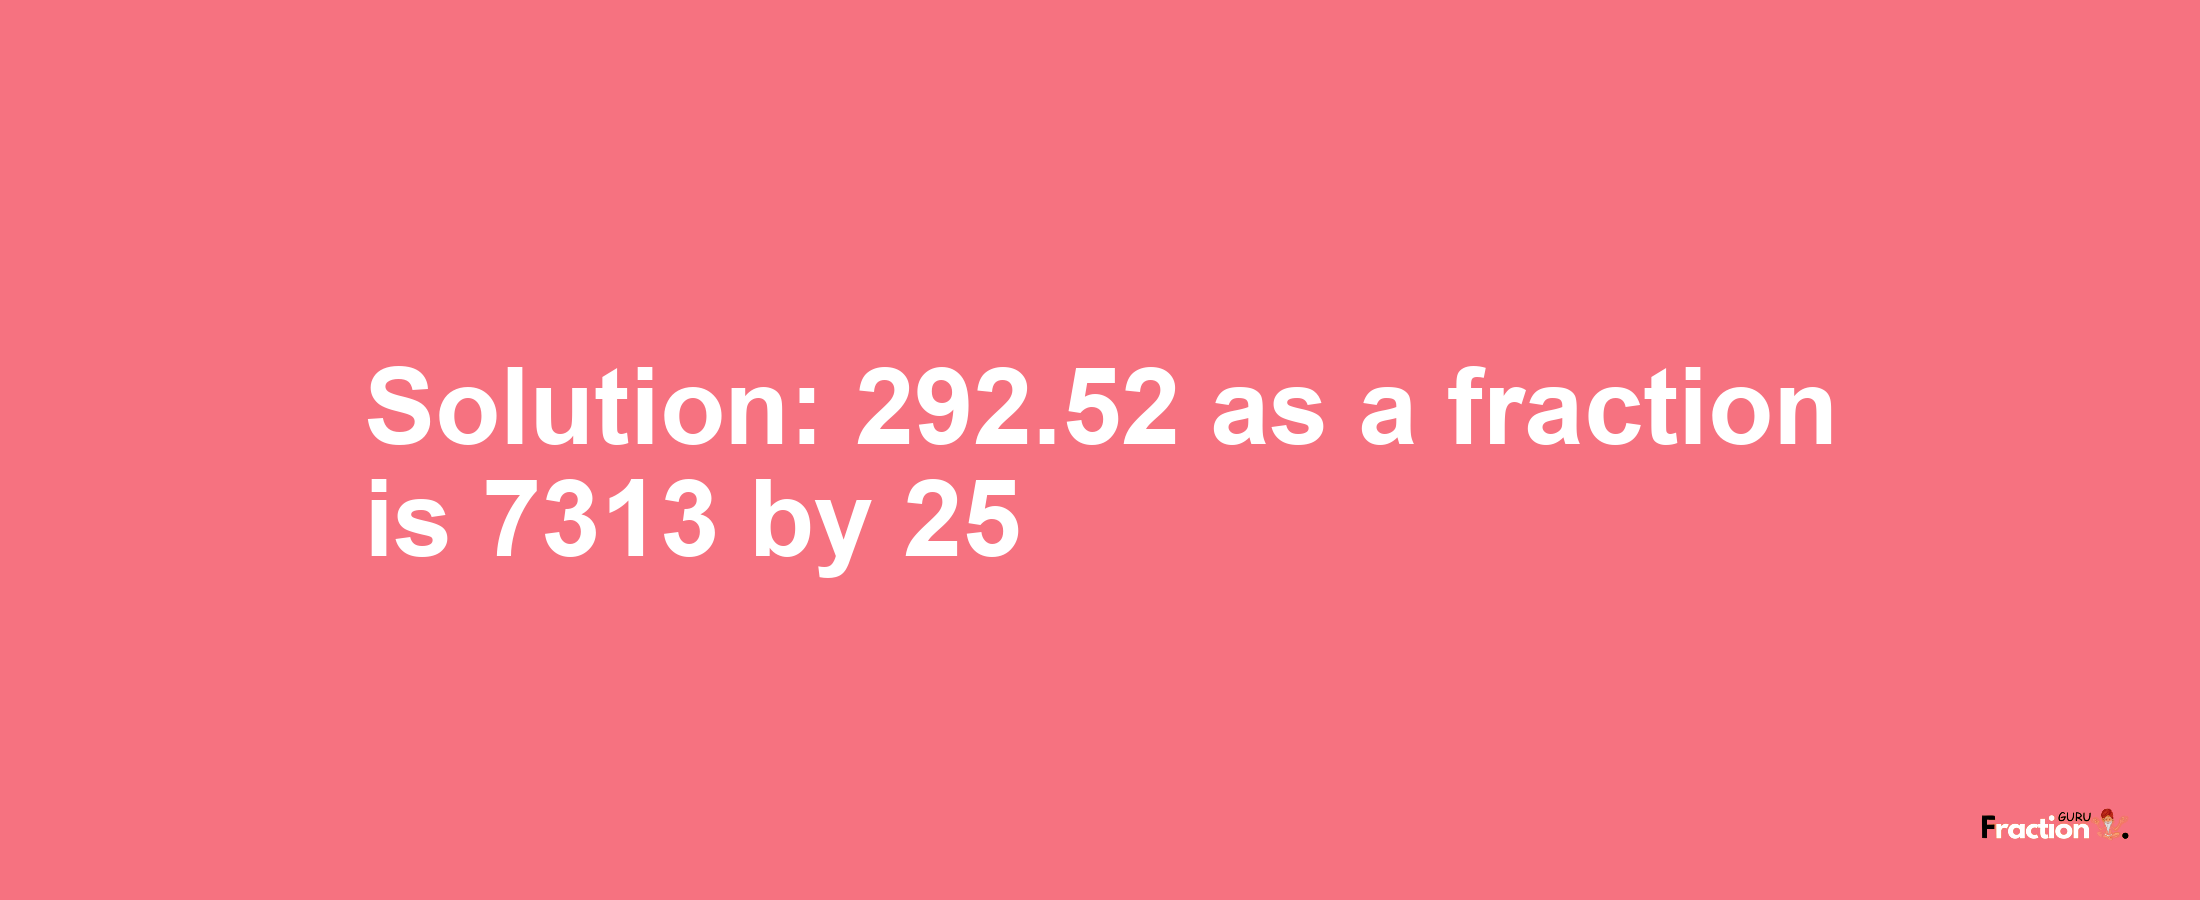 Solution:292.52 as a fraction is 7313/25